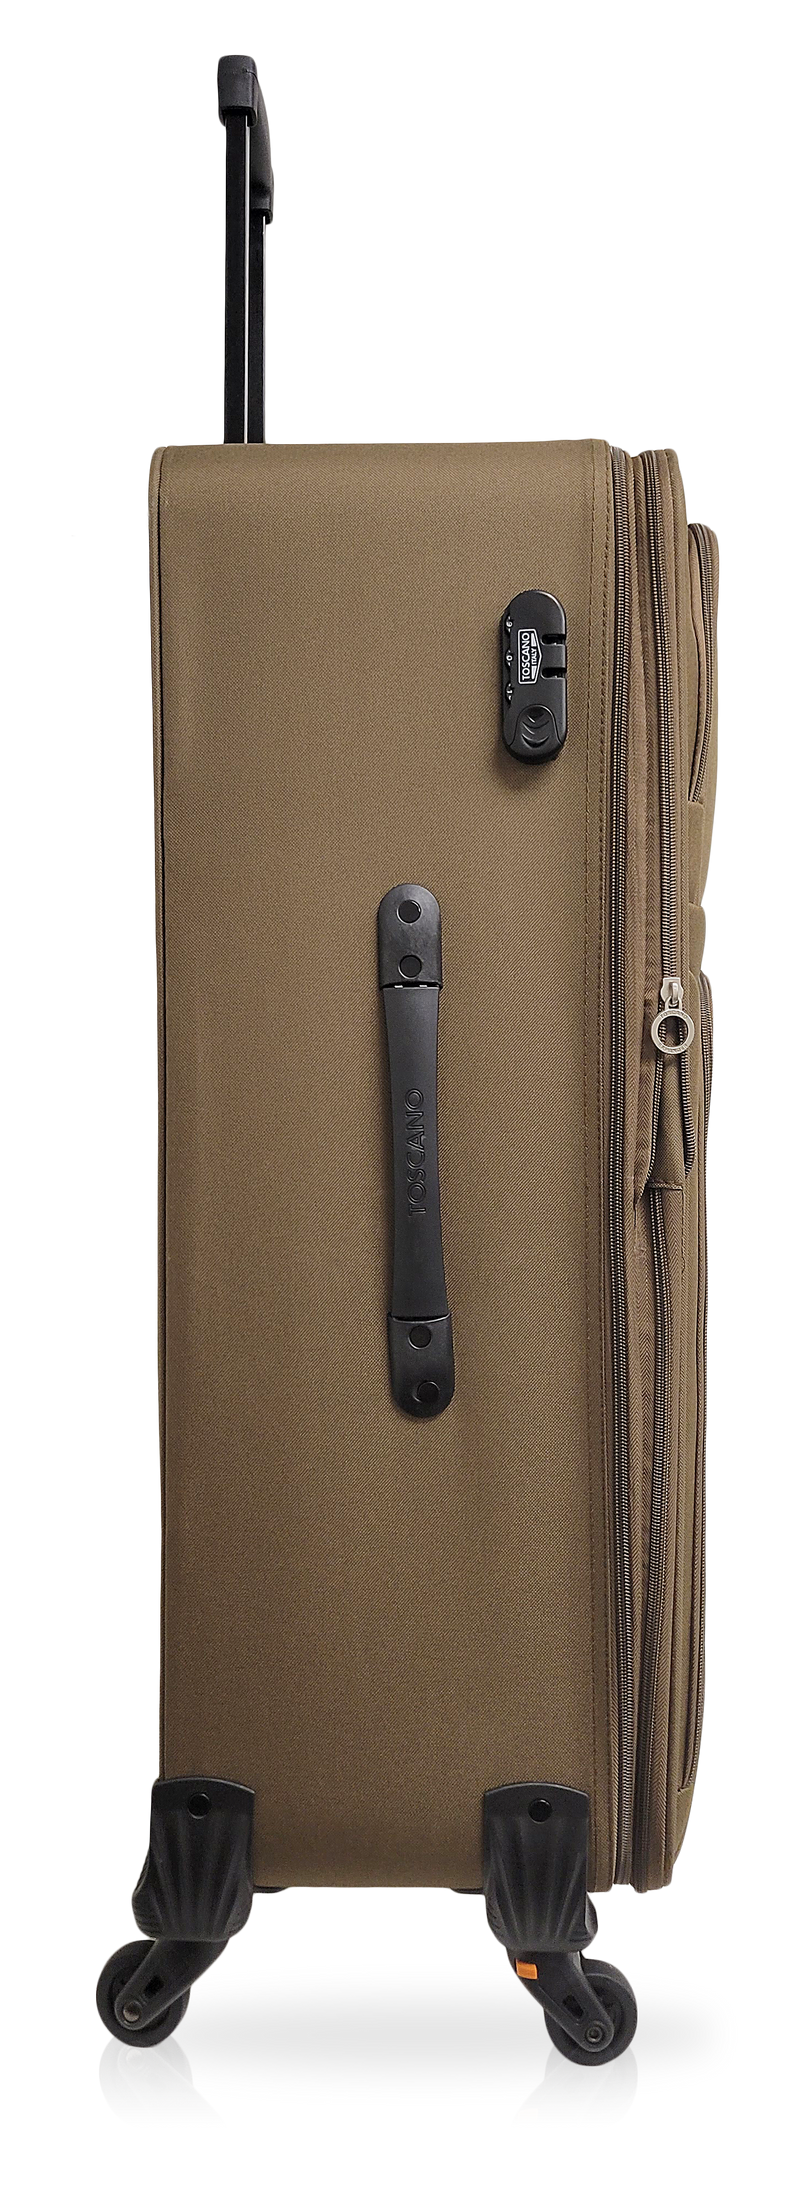 TOSCANO by Tucci NOTEVOLE 27" Lightweight Travel Suitcase